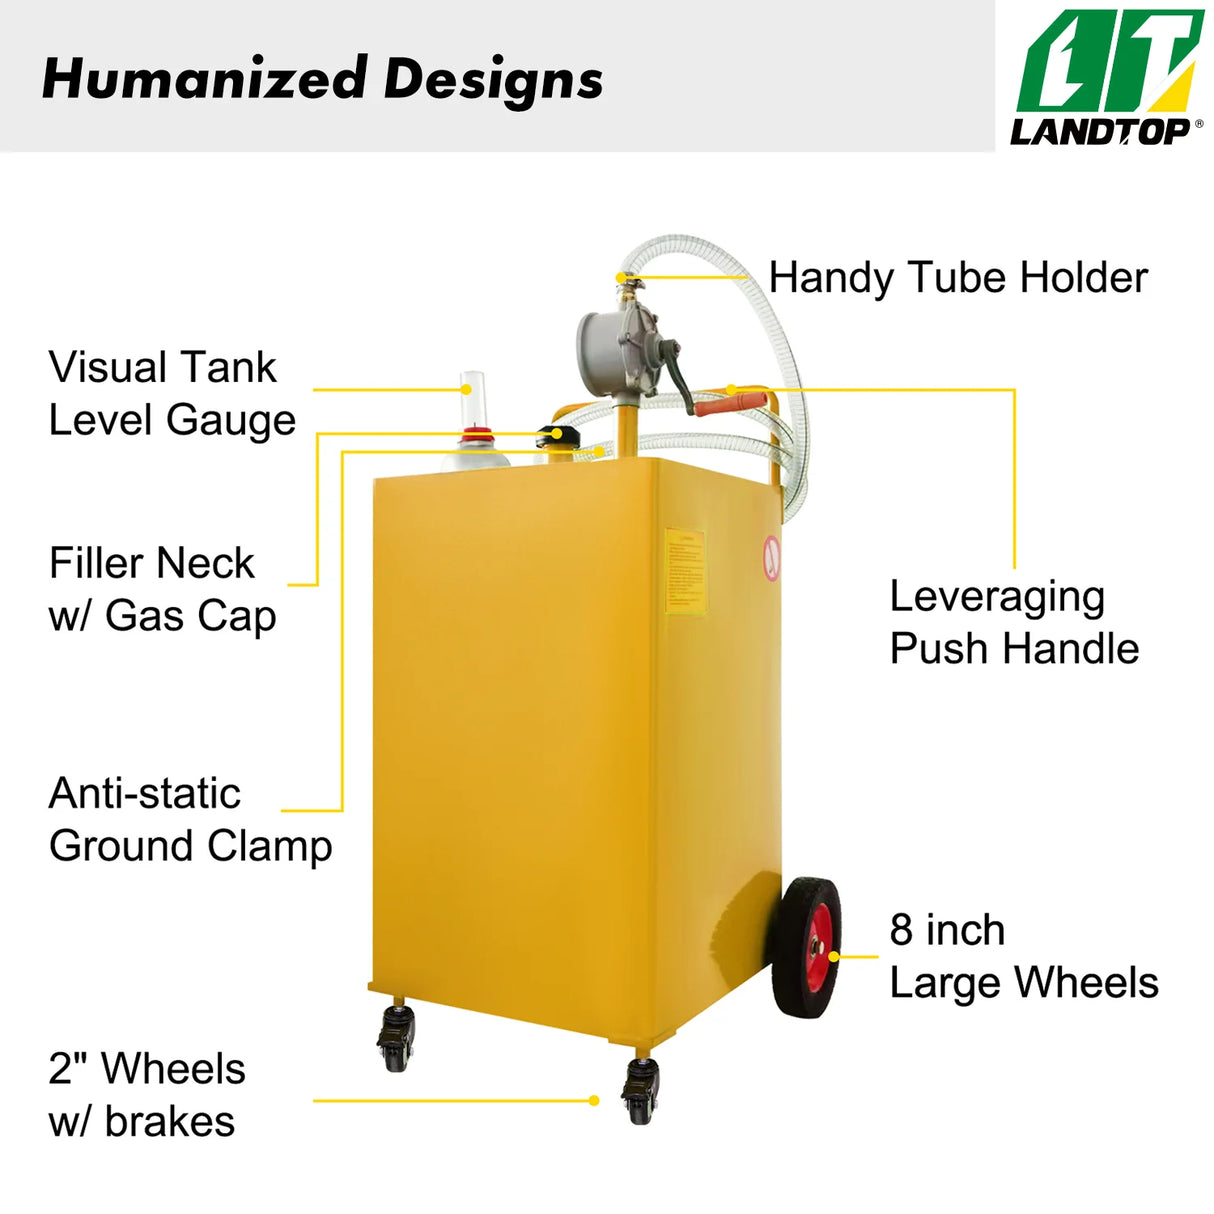 30 Gallon Fuel Caddy, Gas Storage Tank & 4 Wheels, with Manuel Transfer Pump, Gasoline Diesel Fuel Container for Cars, Lawn Mowers, ATVs, Boats, More, Yellow